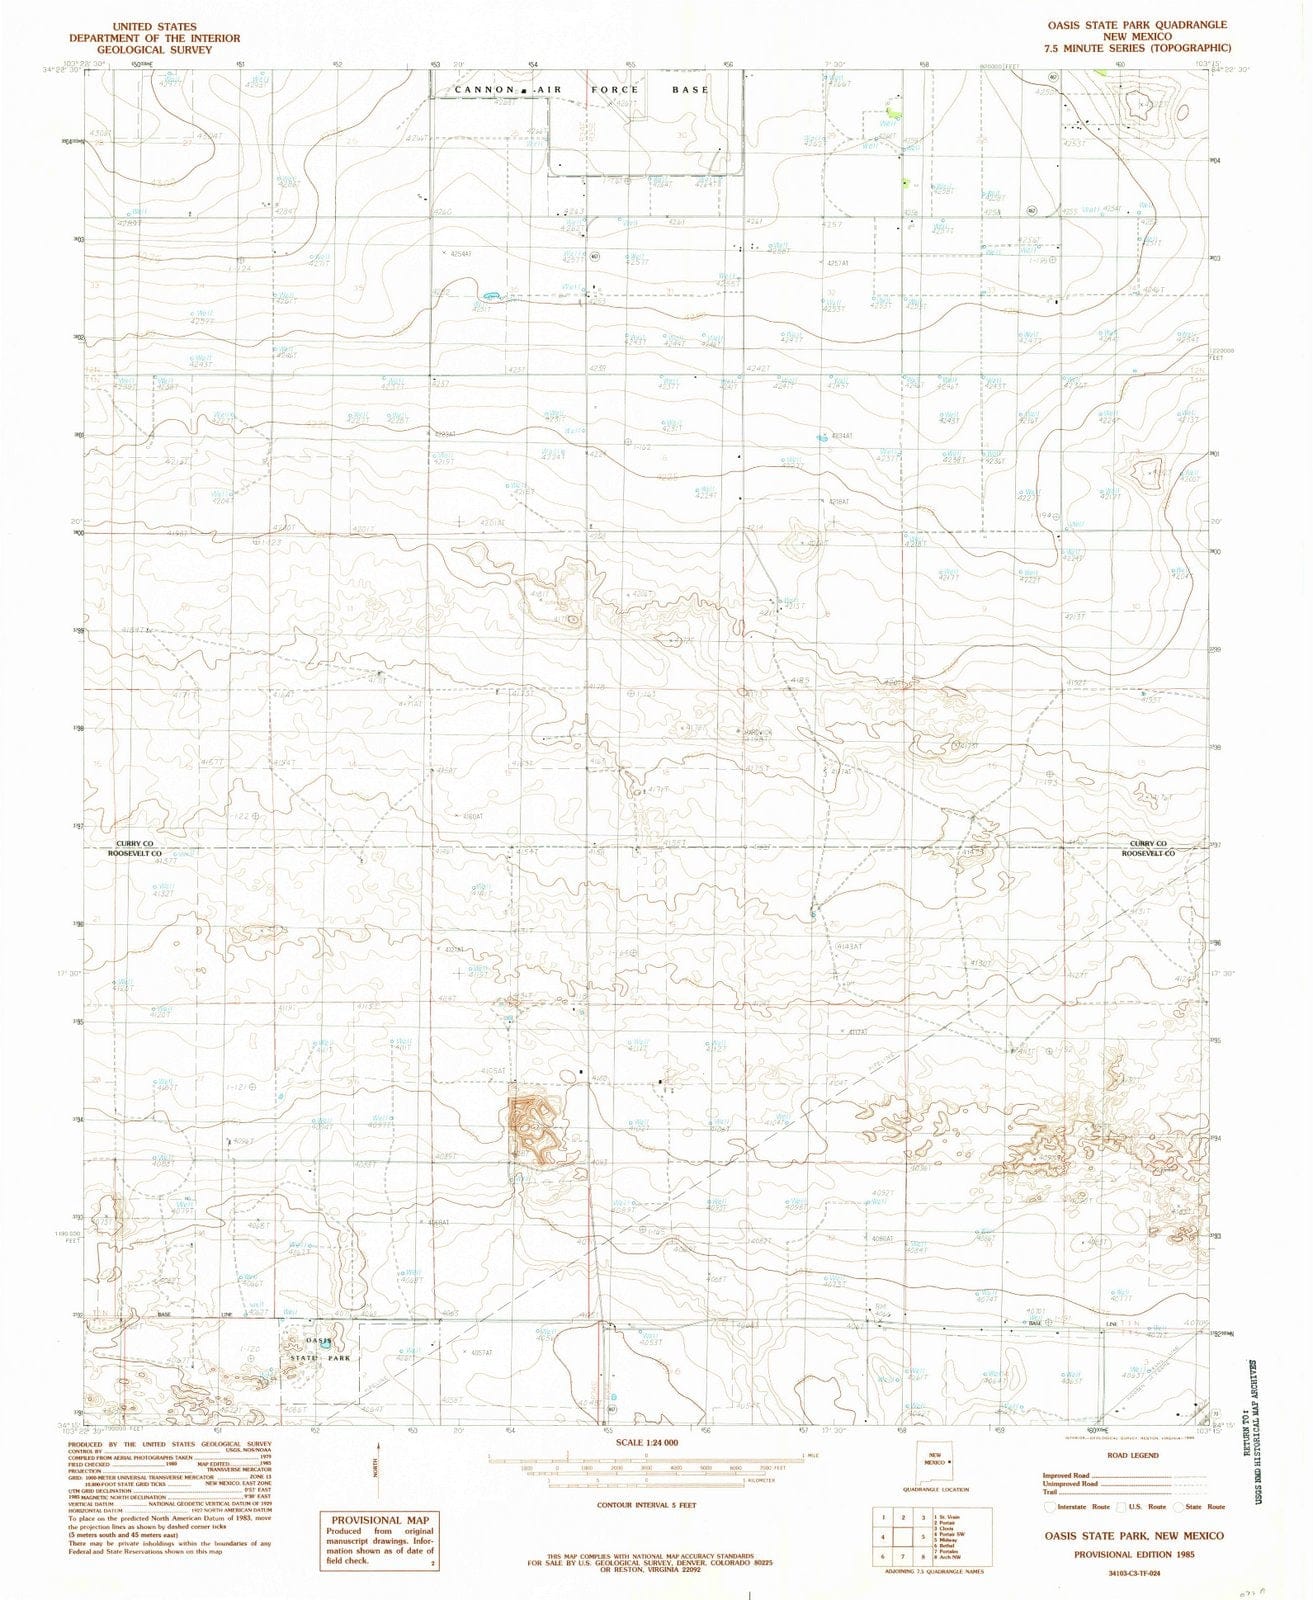 1985 Oasis State Park, NM - New Mexico - USGS Topographic Map